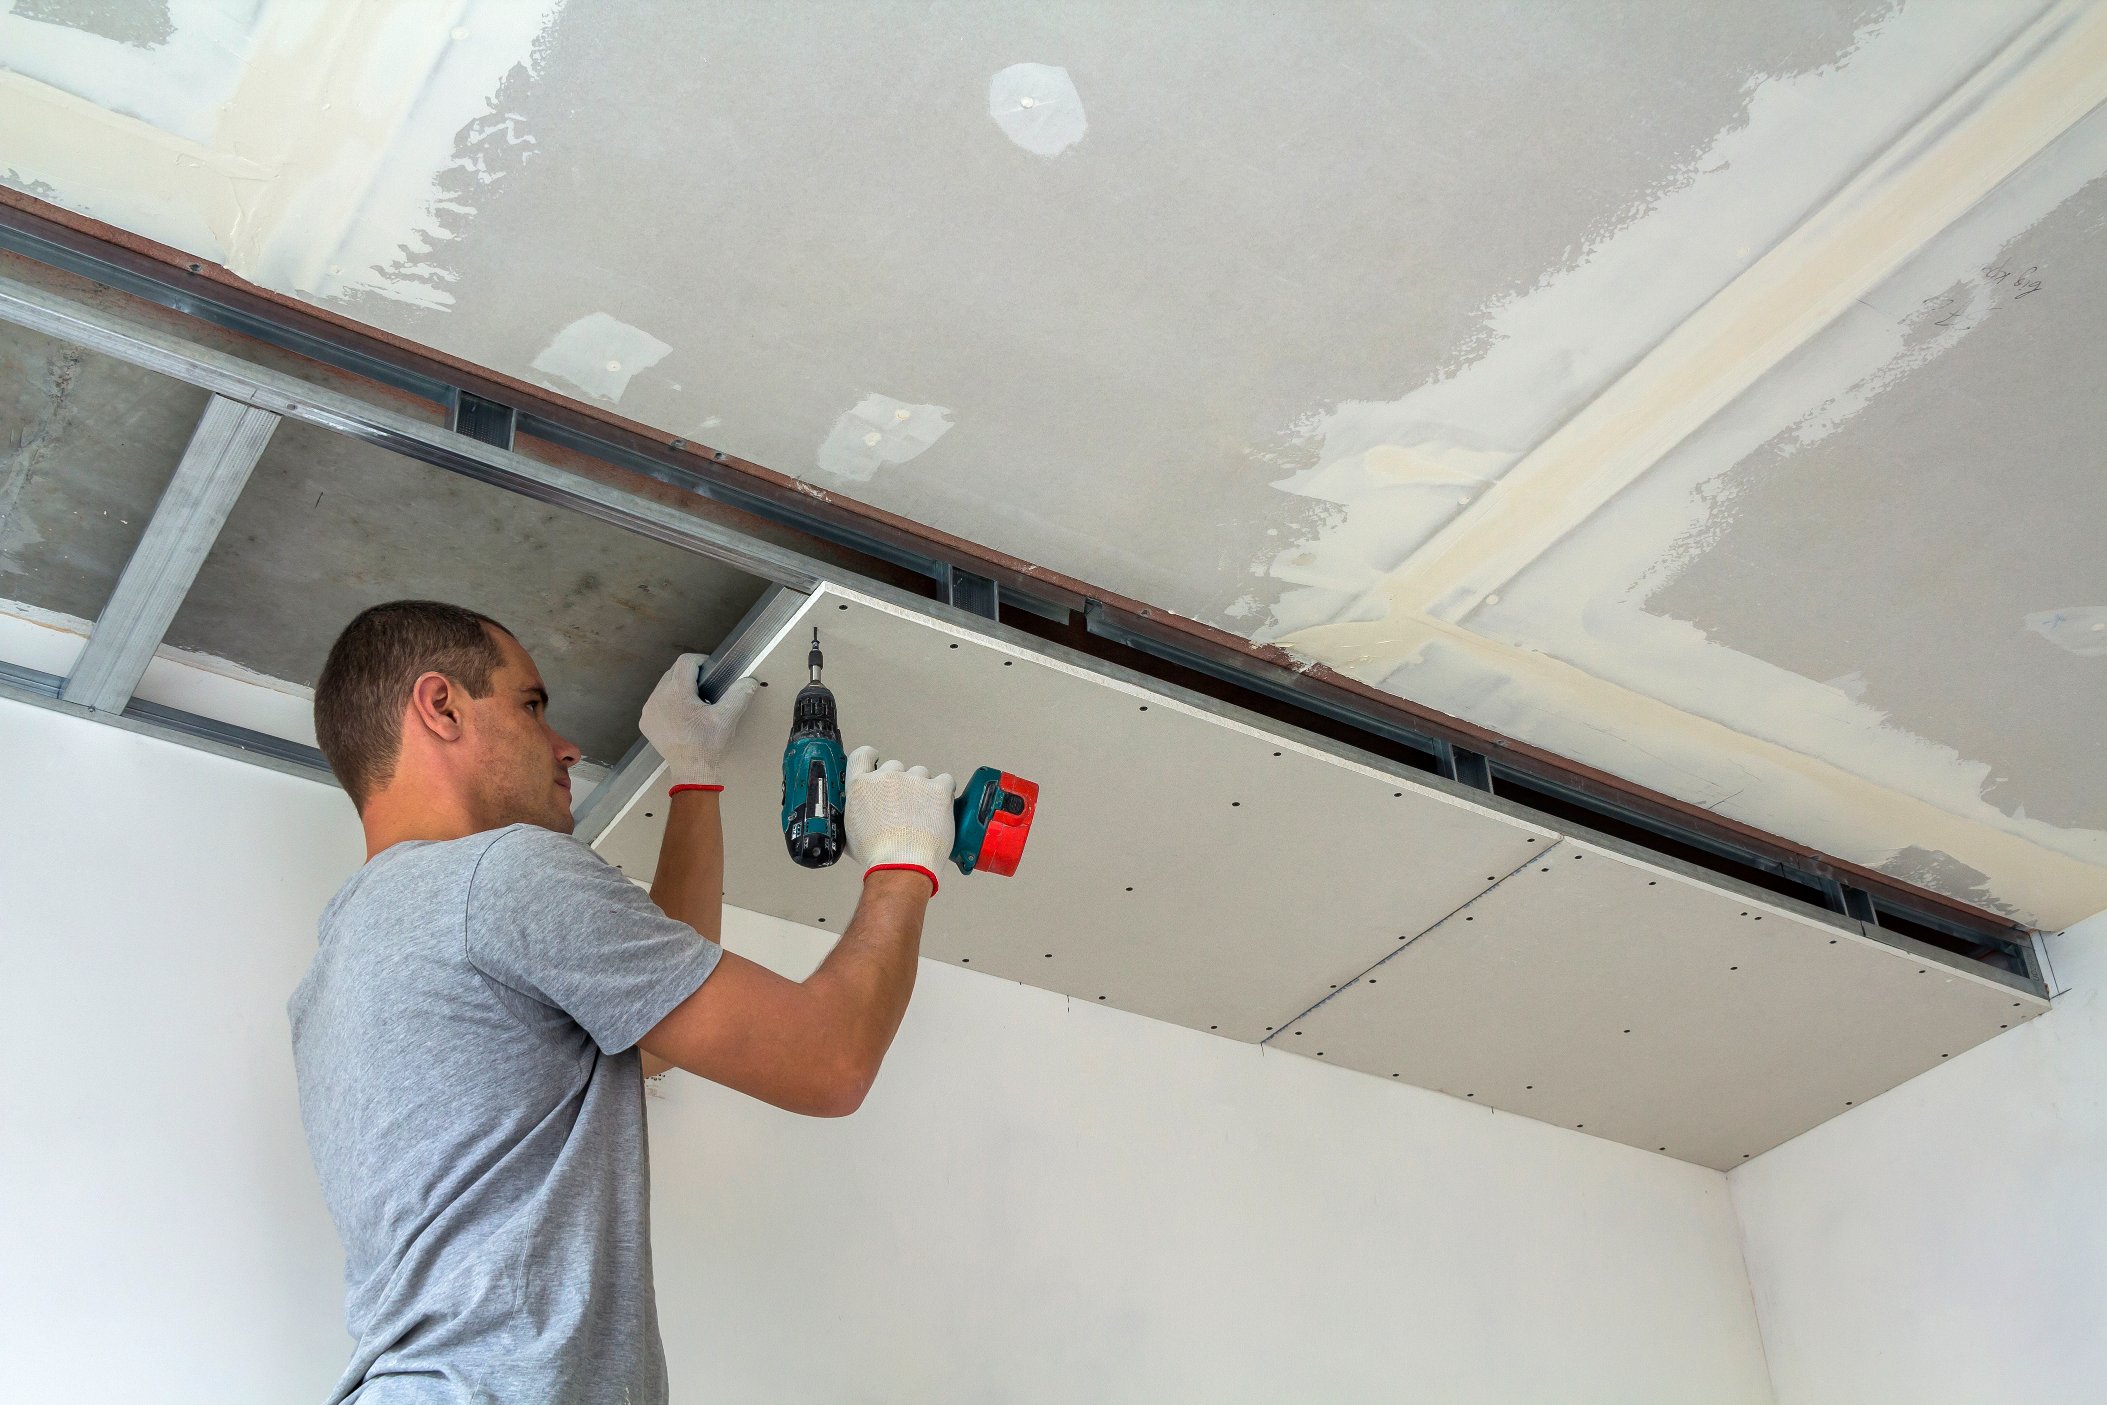 A man is working on drywall repair installation on a ceiling in a room 1